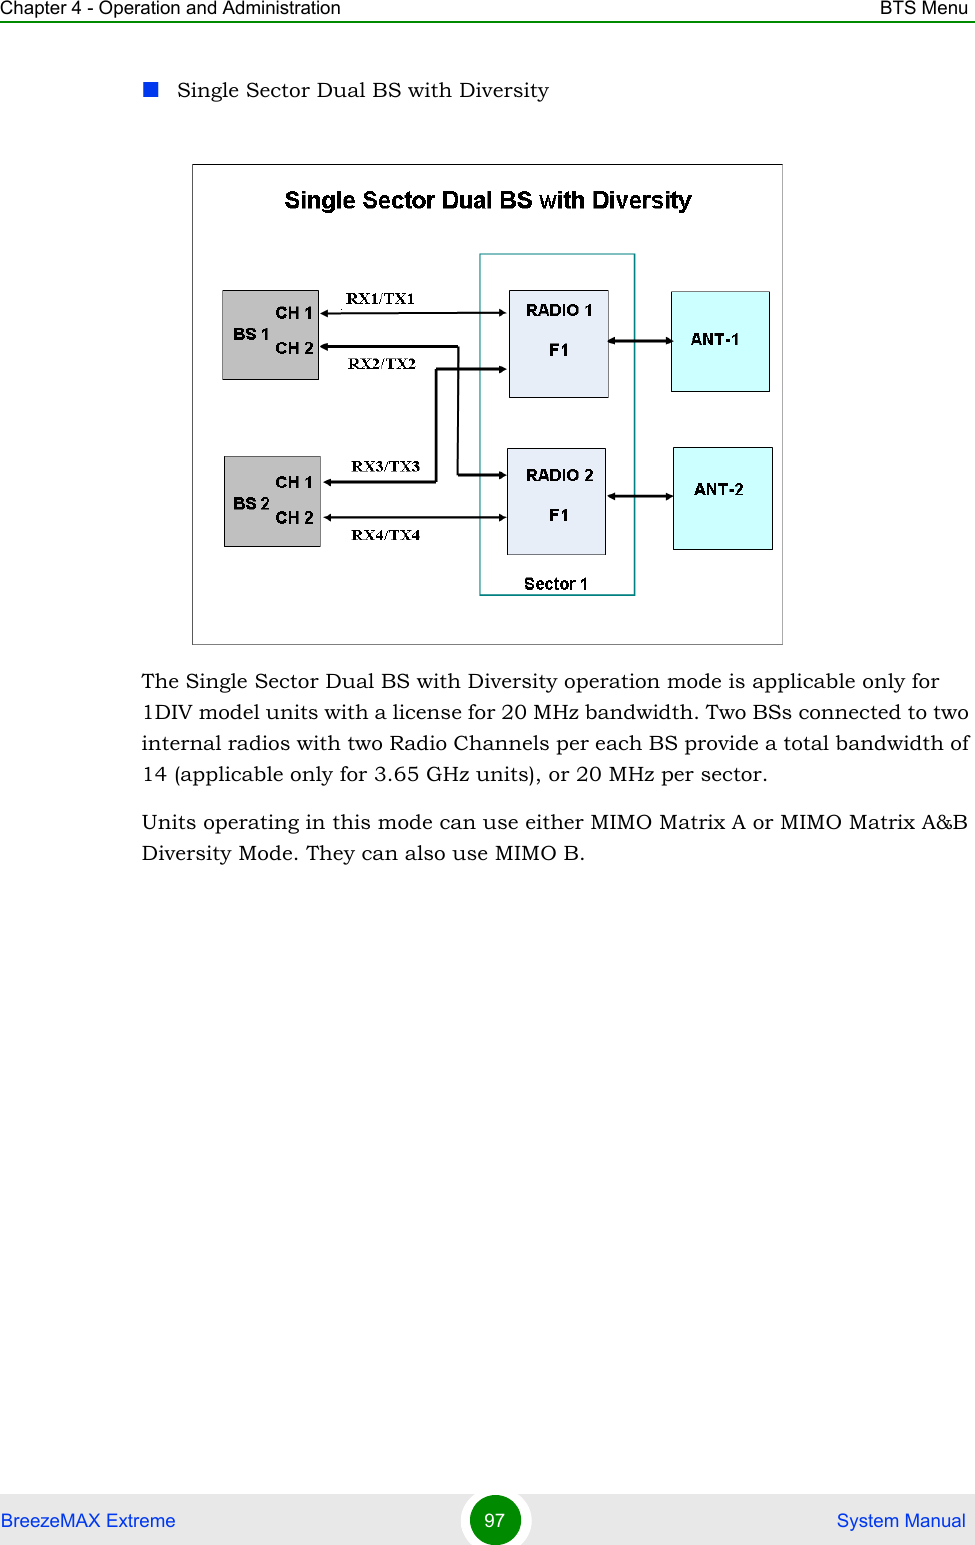 Chapter 4 - Operation and Administration BTS MenuBreezeMAX Extreme 97  System ManualSingle Sector Dual BS with DiversityThe Single Sector Dual BS with Diversity operation mode is applicable only for 1DIV model units with a license for 20 MHz bandwidth. Two BSs connected to two internal radios with two Radio Channels per each BS provide a total bandwidth of 14 (applicable only for 3.65 GHz units), or 20 MHz per sector.Units operating in this mode can use either MIMO Matrix A or MIMO Matrix A&amp;B Diversity Mode. They can also use MIMO B.